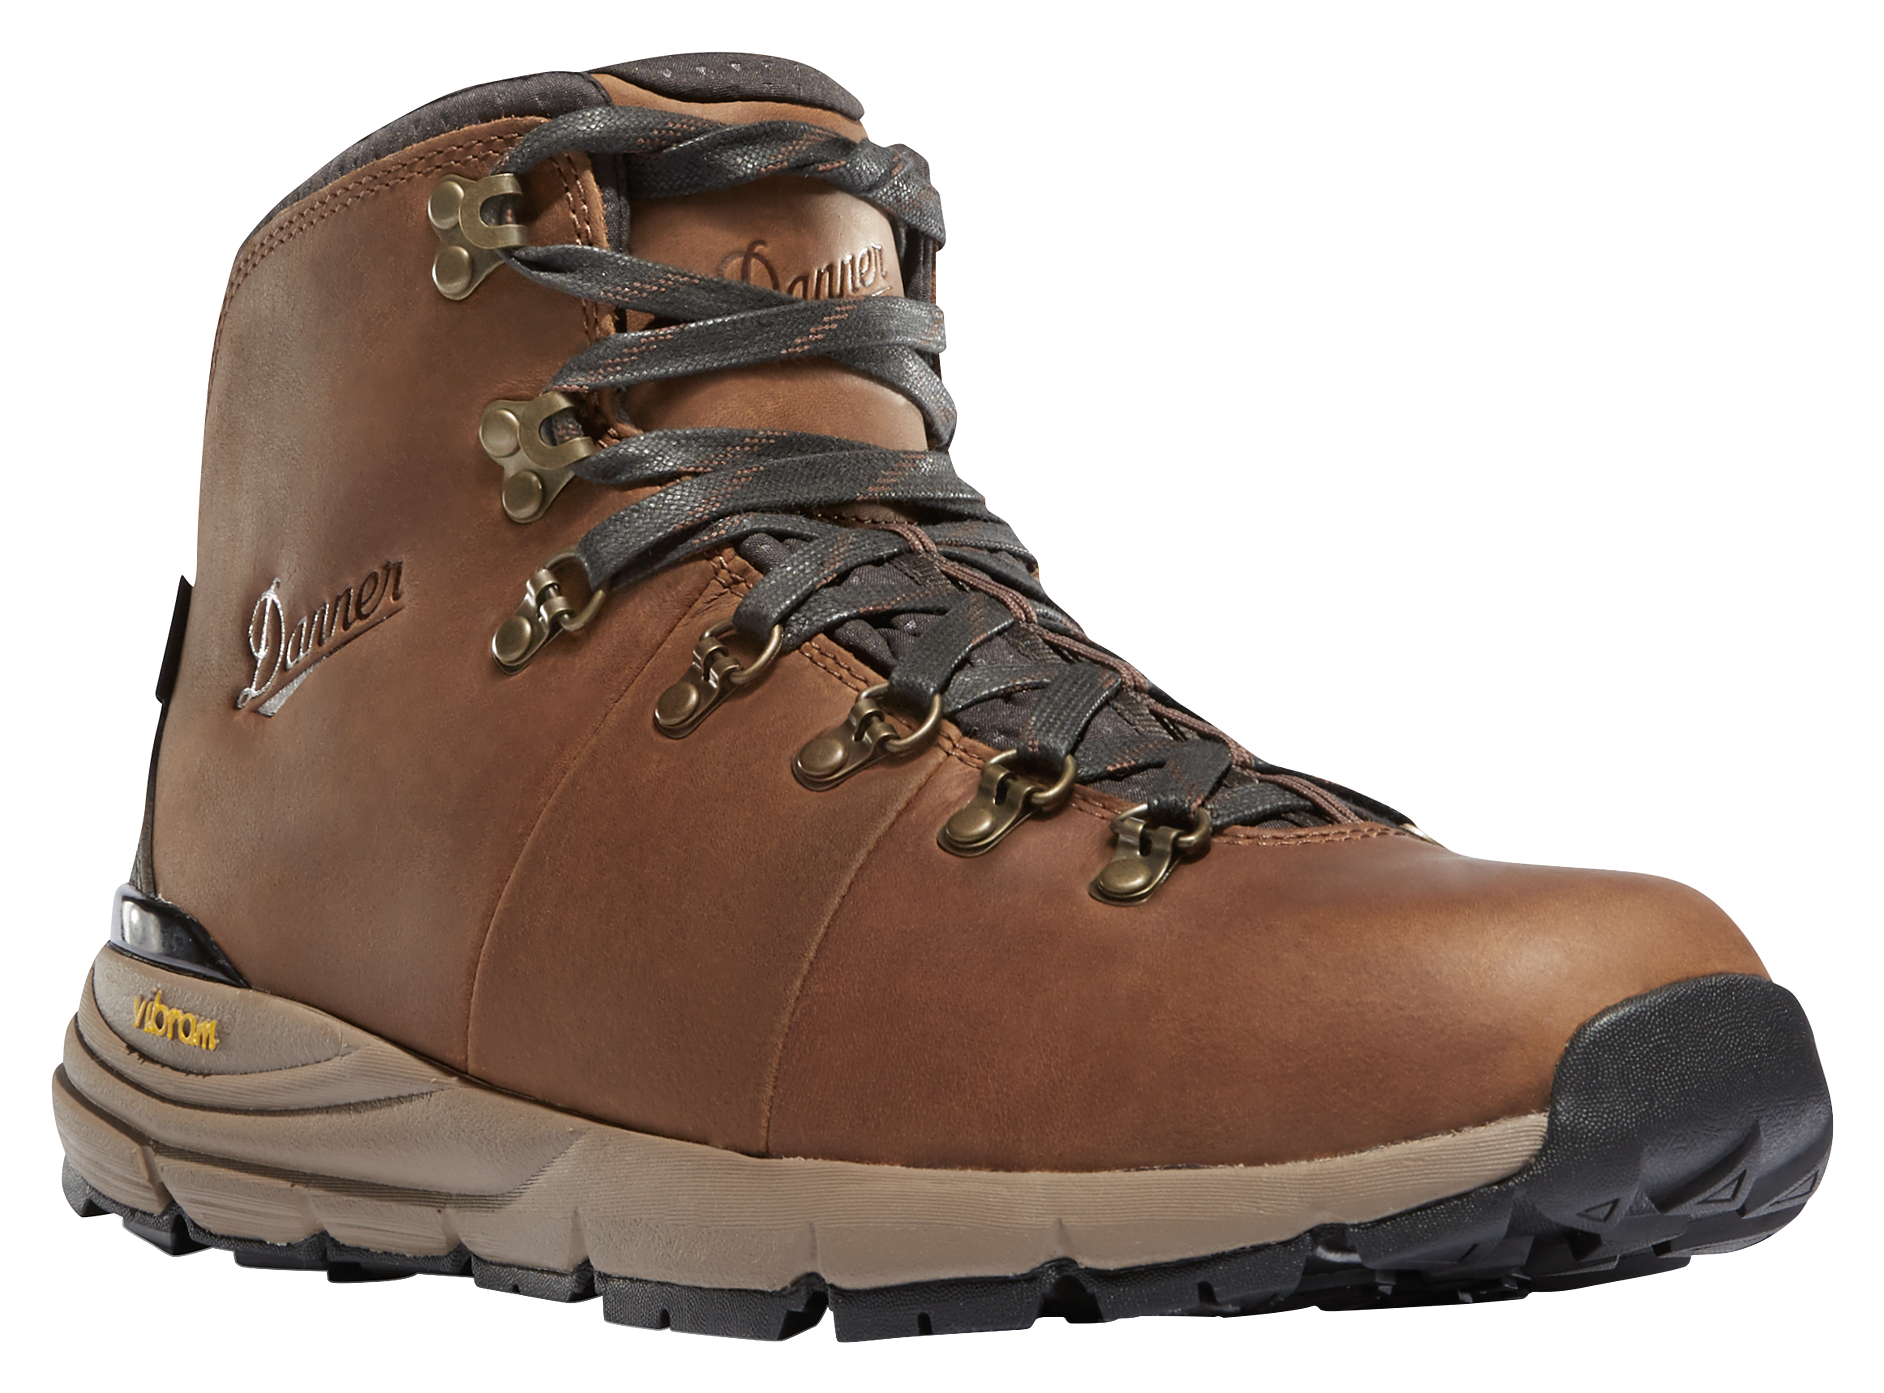 Danner Mountain 600 Waterproof Hiking Boots for Men - Rich Brown - 10.5M